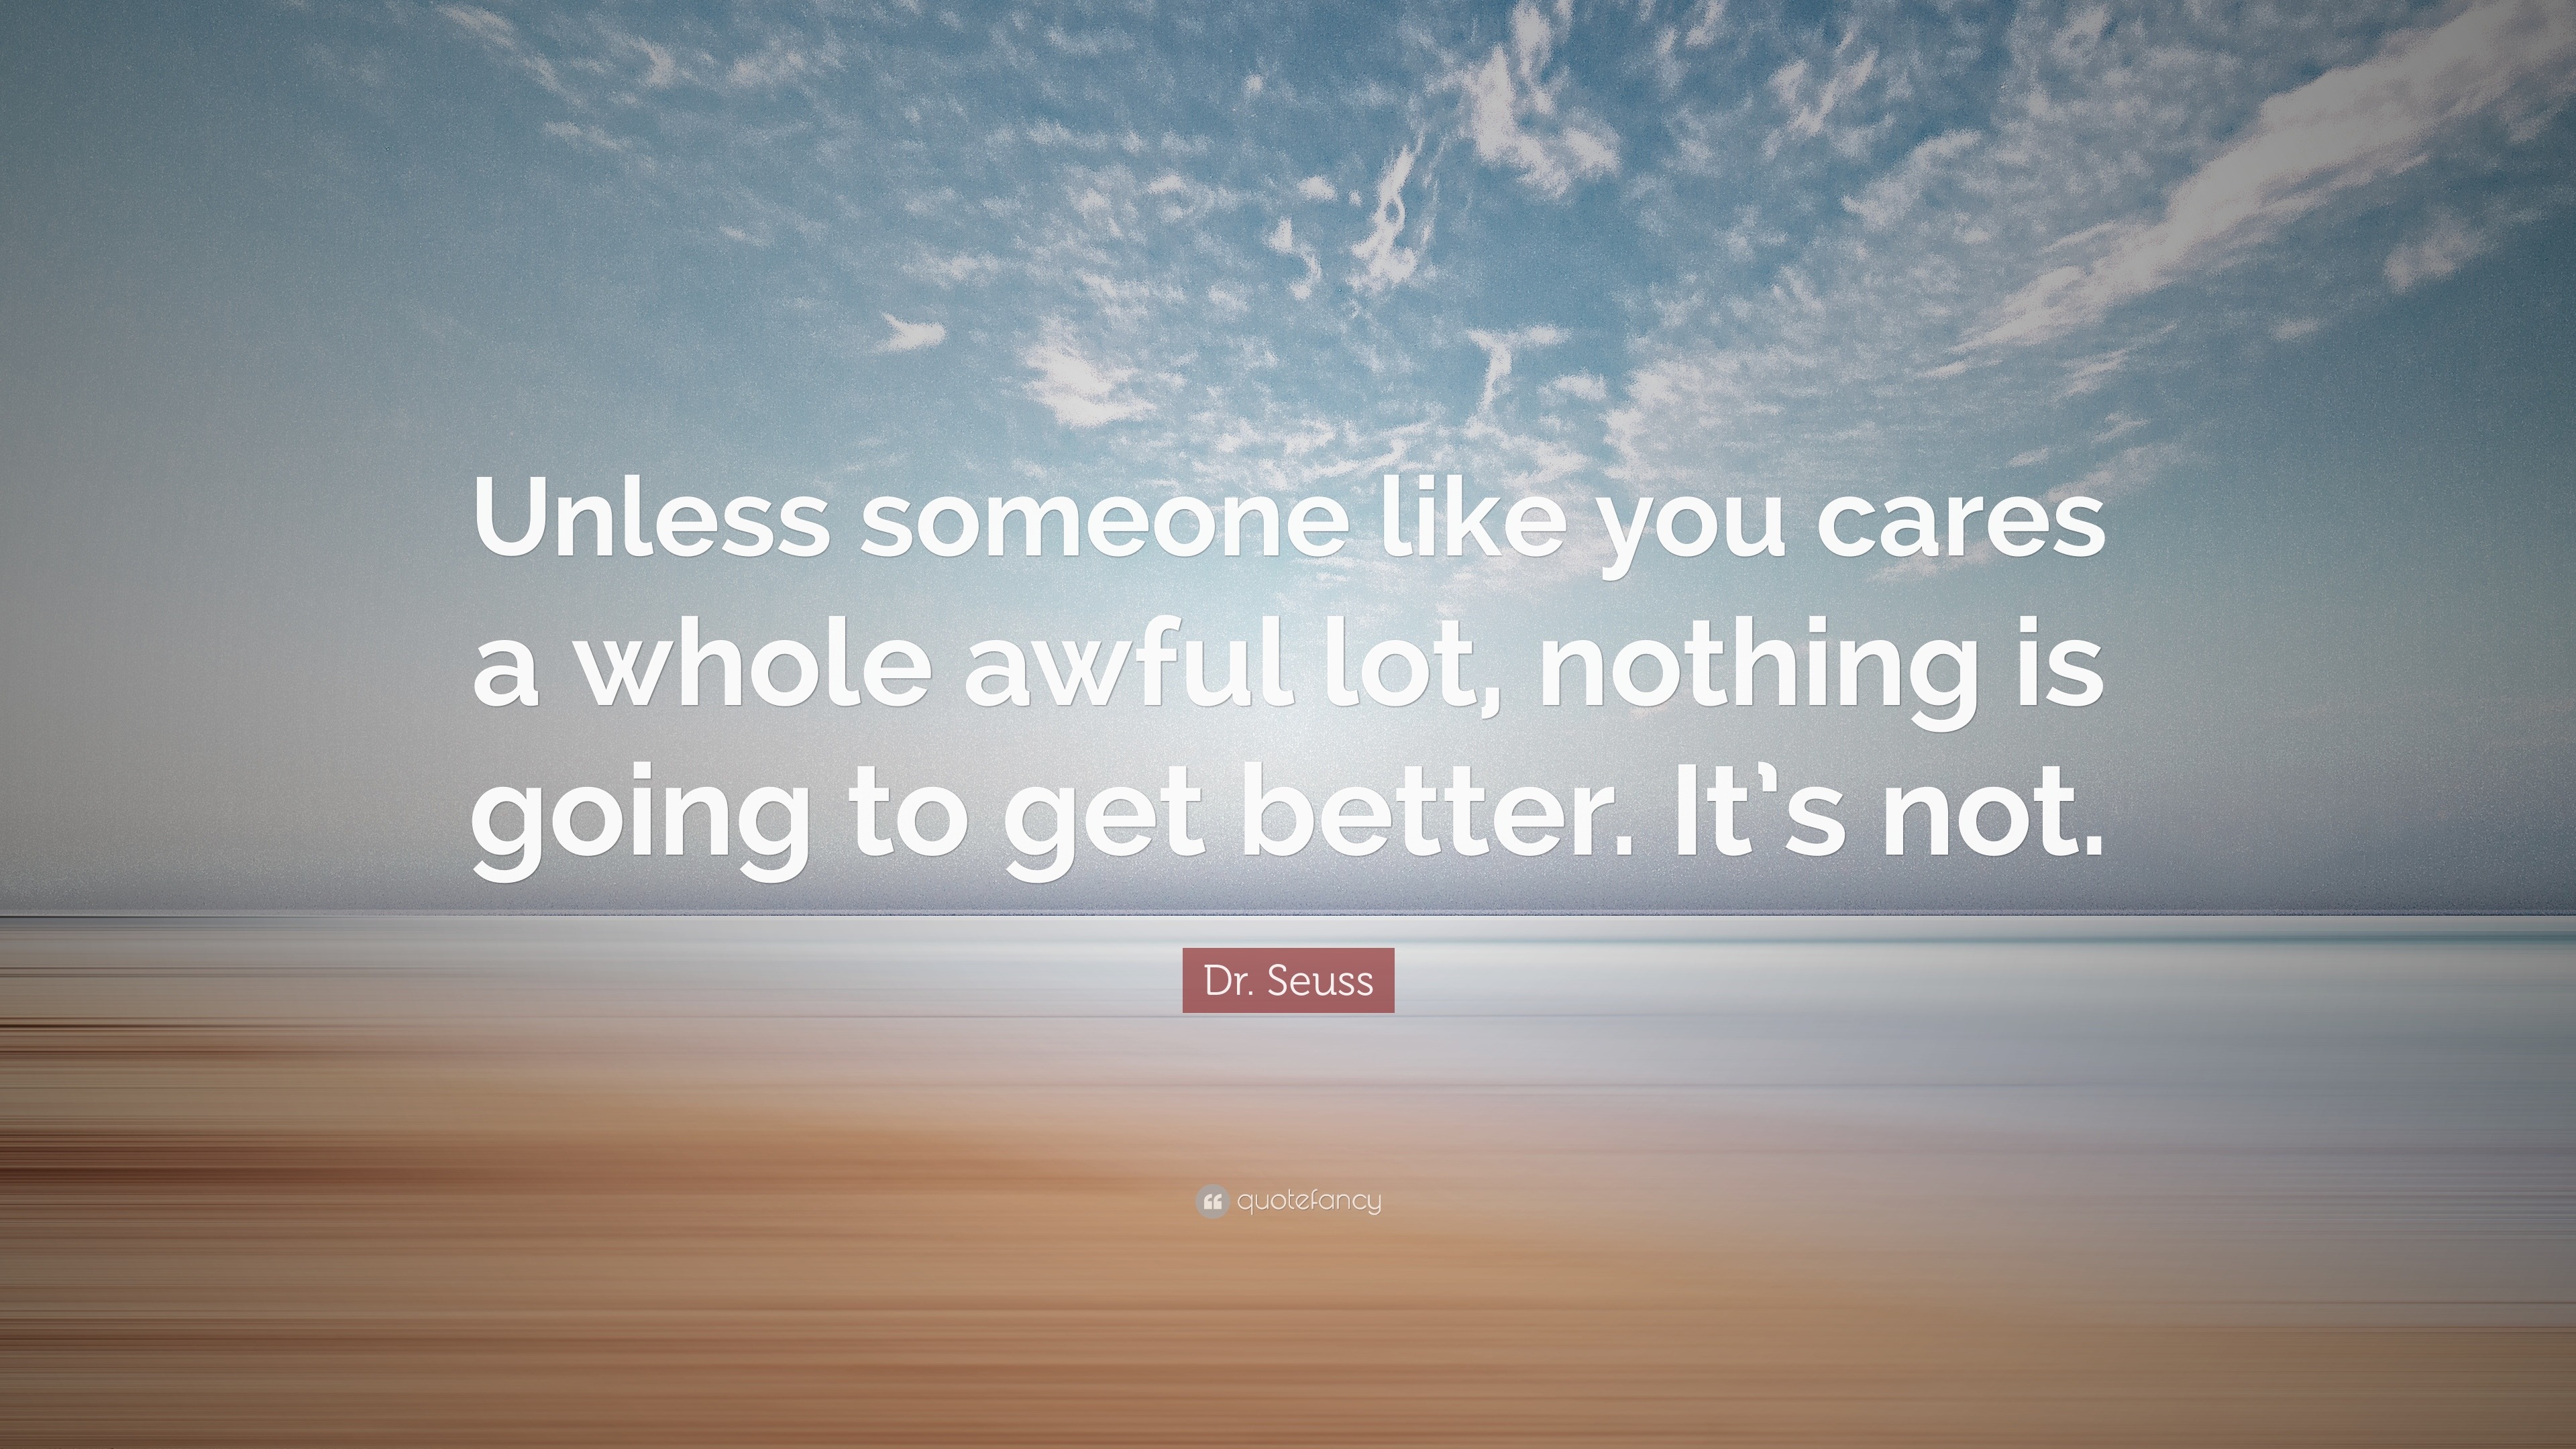 unless someone like you cares